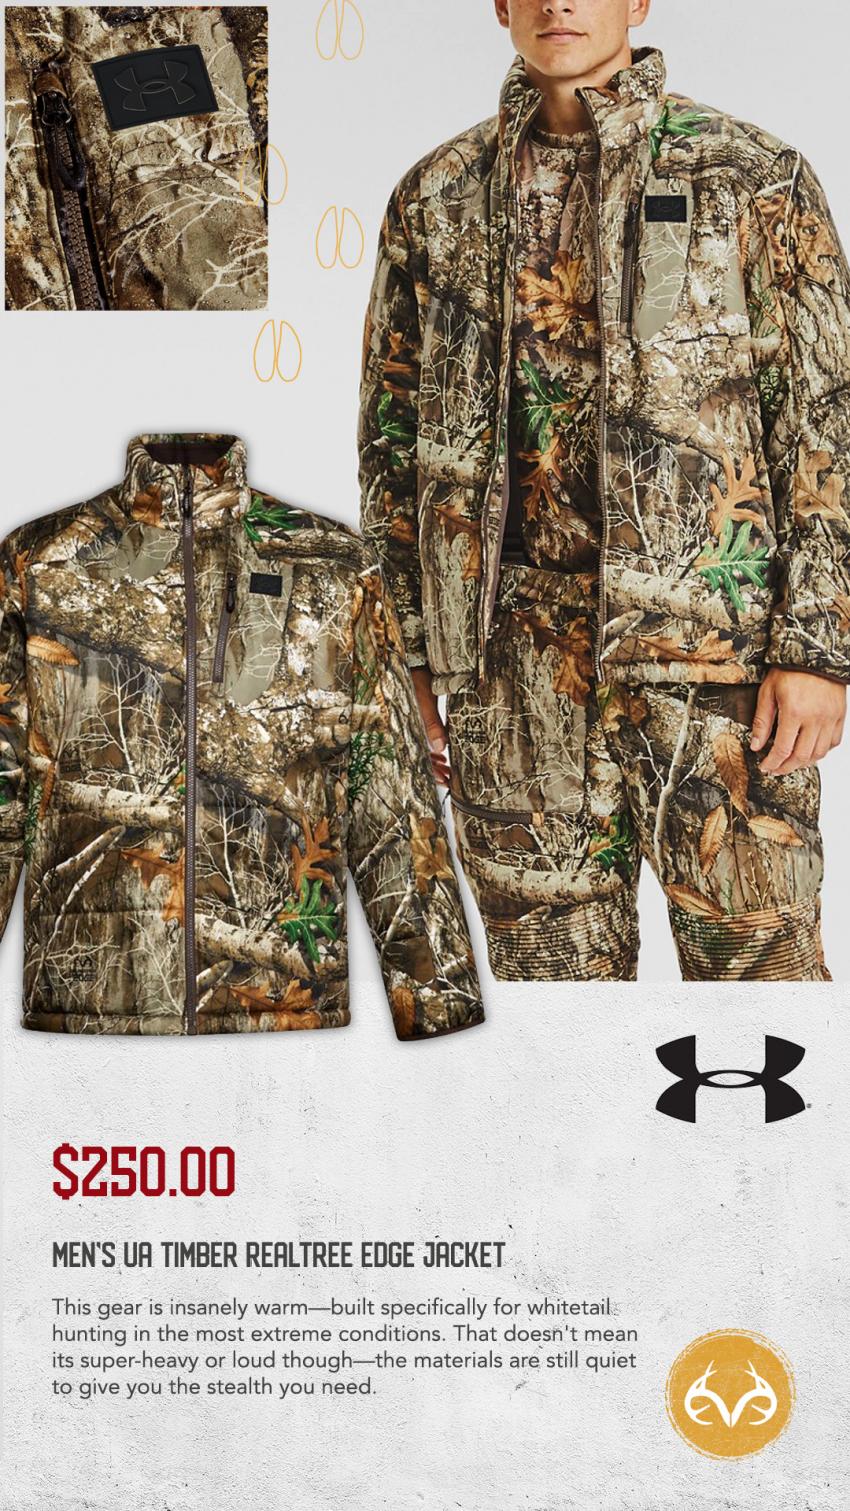 Under Armour Realtree Camo Apparel Gives Hunters the Edge Afield